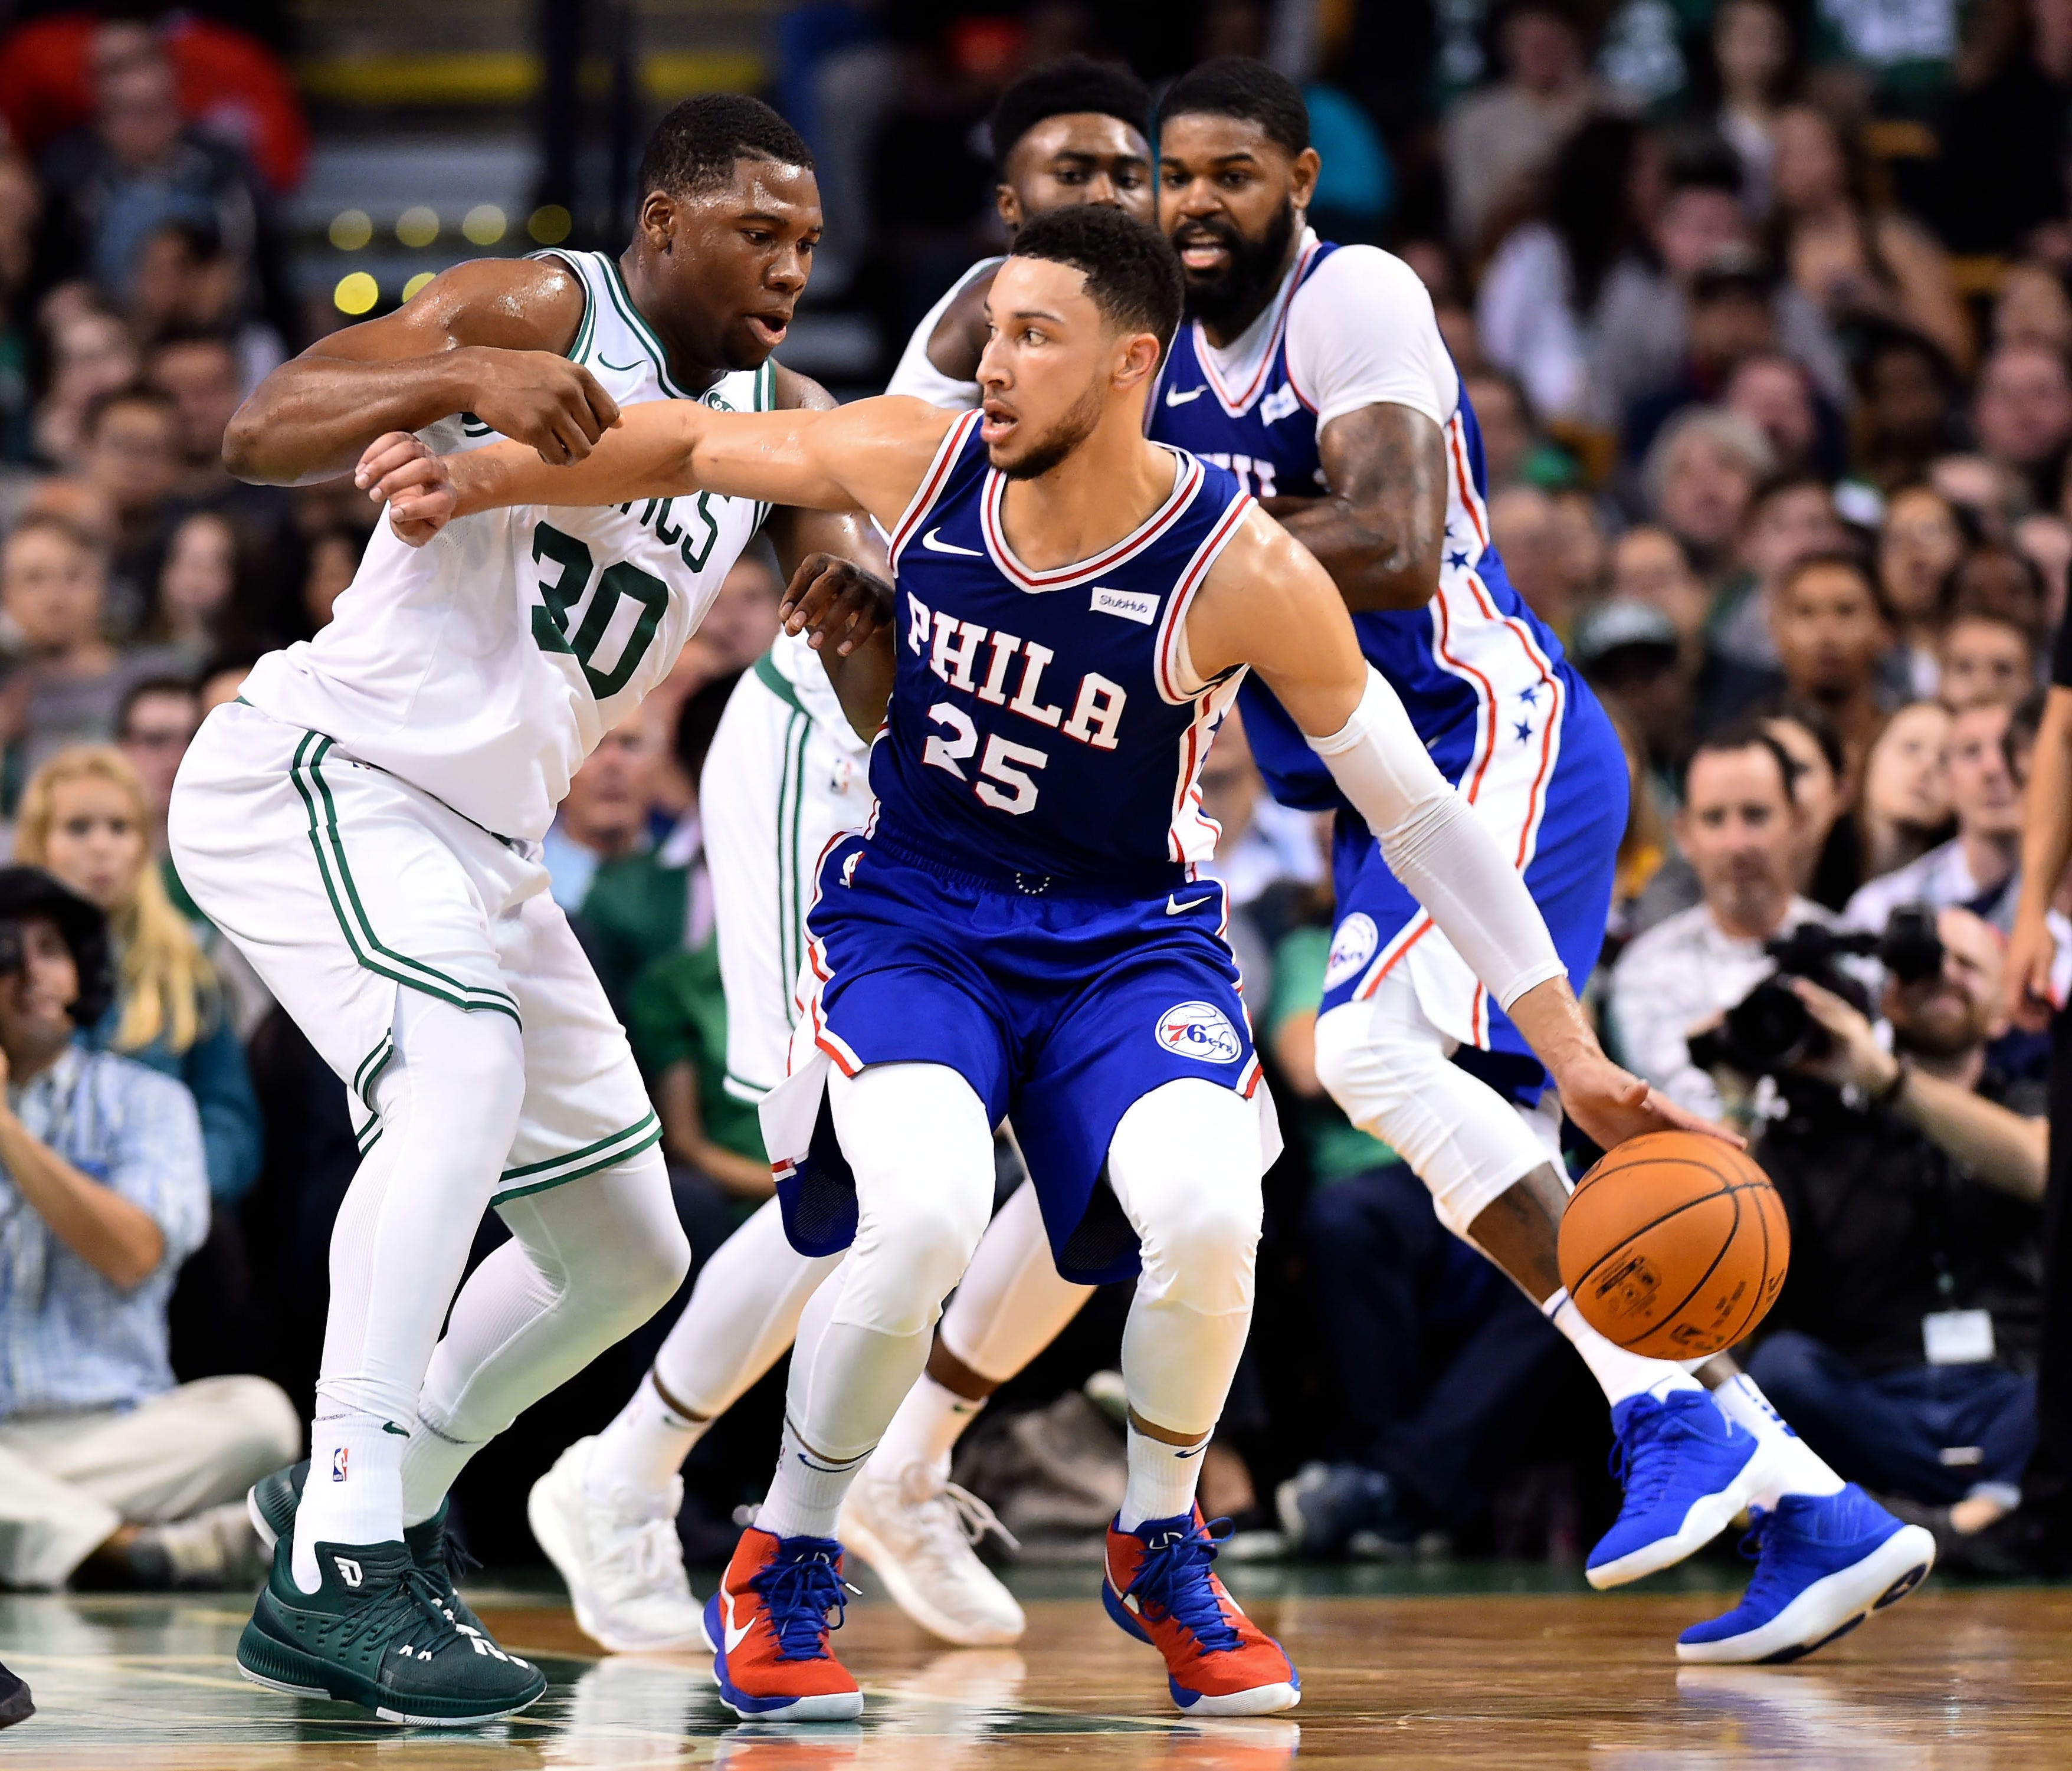 Philadelphia 76ers guard Ben Simmons (25) dribbles to the basket and is defended by Boston Celtics forward Guerschon Yabusele (30) during the first half at the TD Garden.